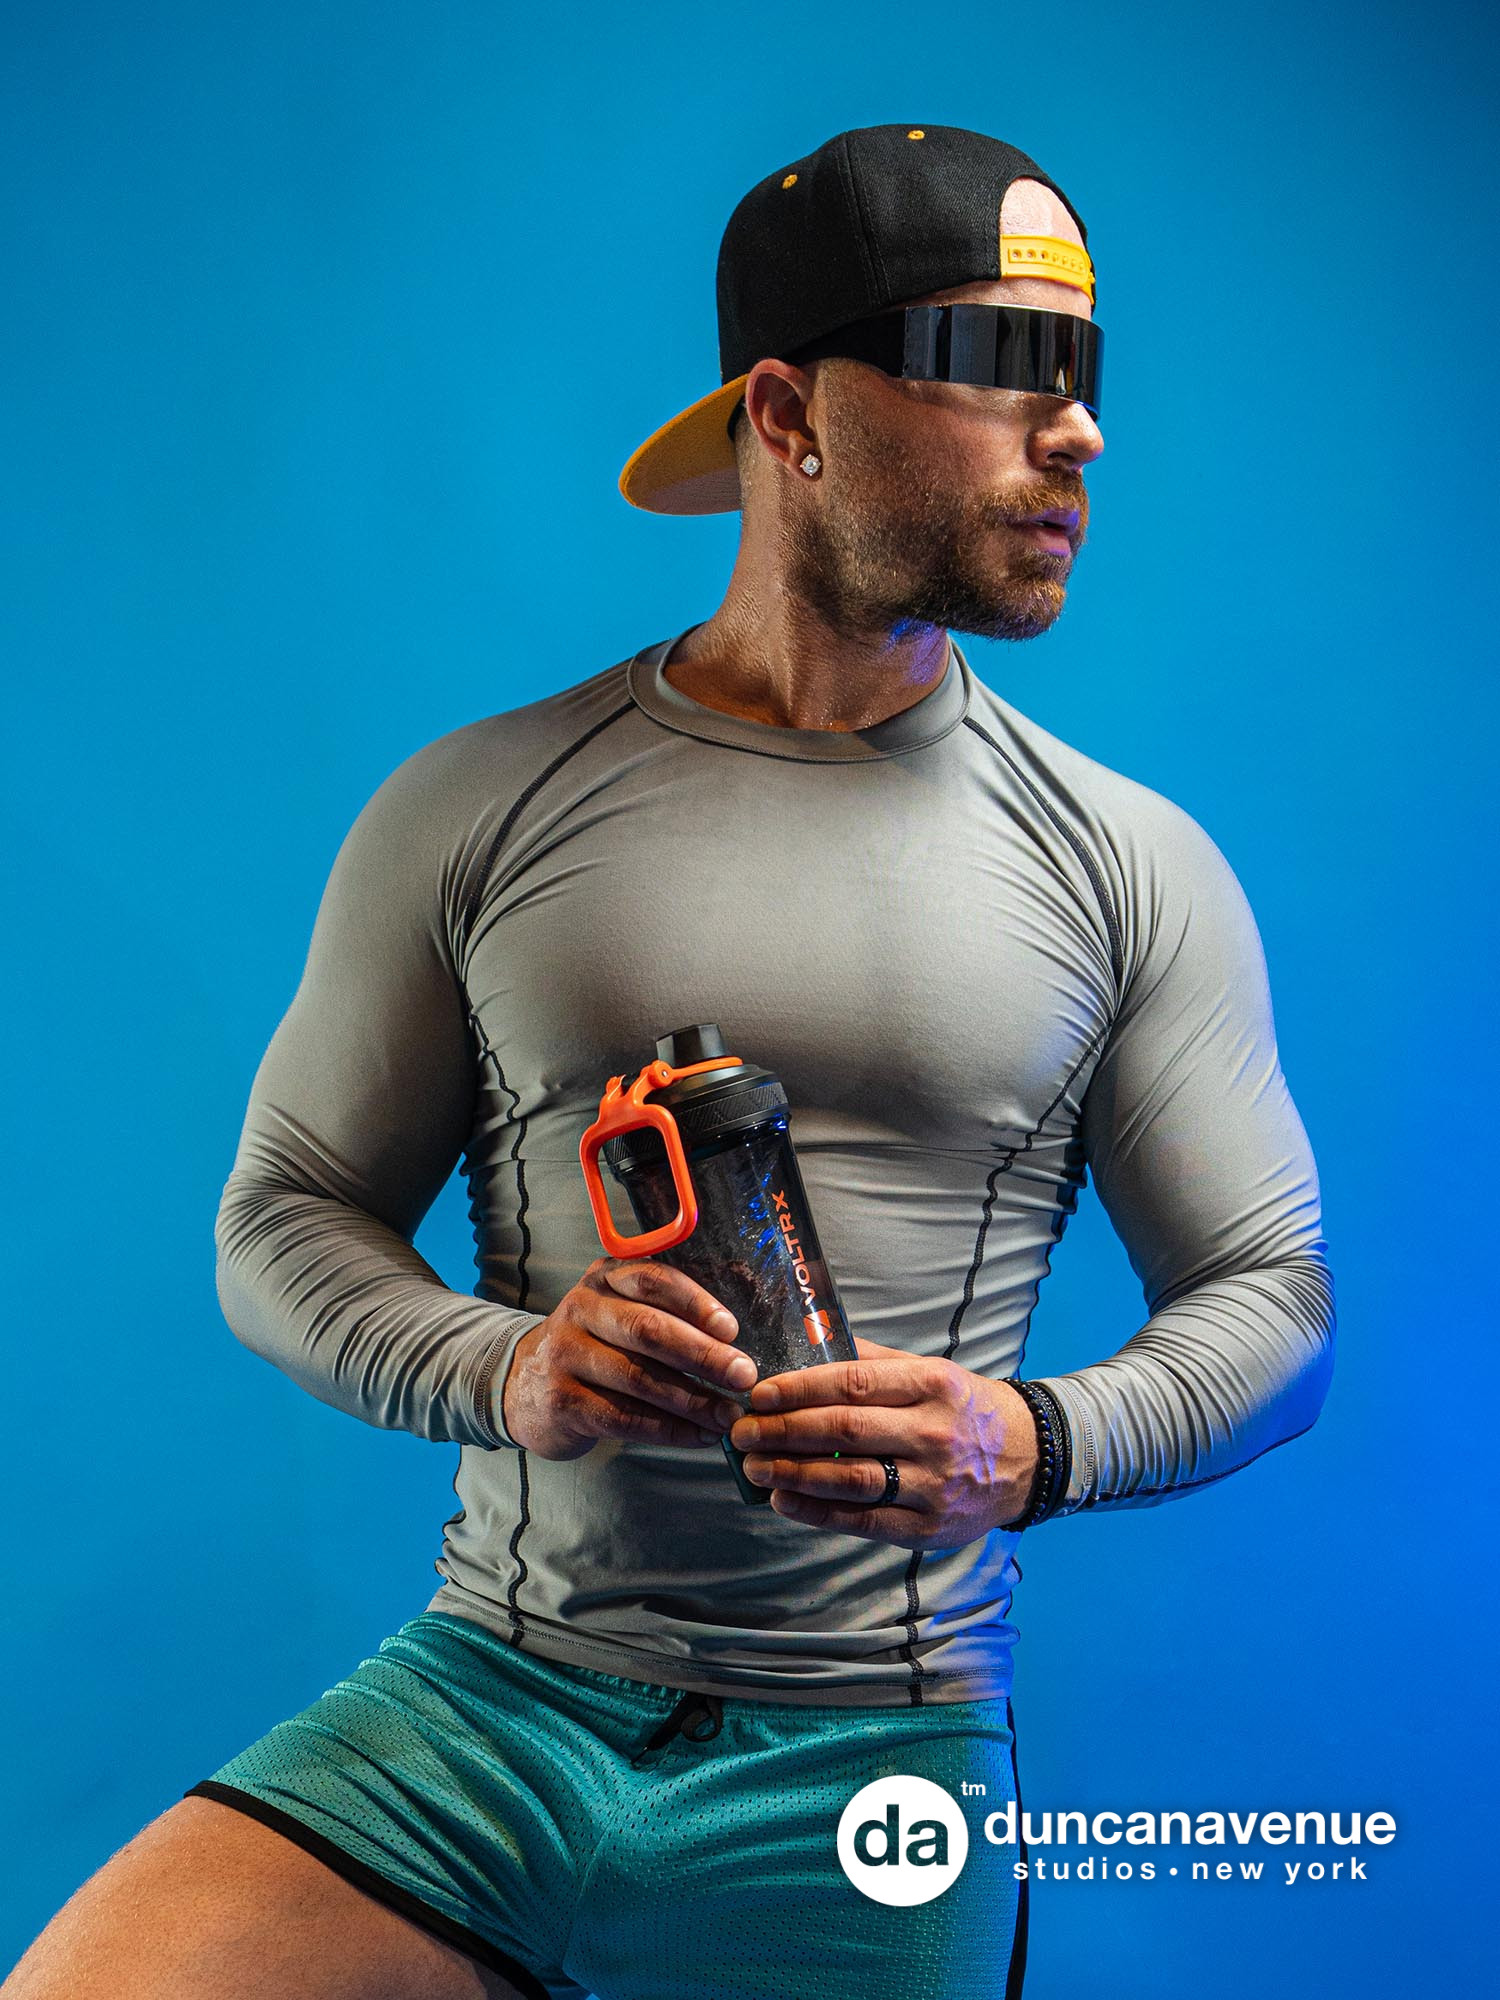 Duncan Avenue Studios: Elevating Amazon Affiliates and Influencers in NYC's Dynamic Landscape – Amazon Product Photography –  Fitness Model Maxwell Alexander for the GUY STYLE MAGAZINE